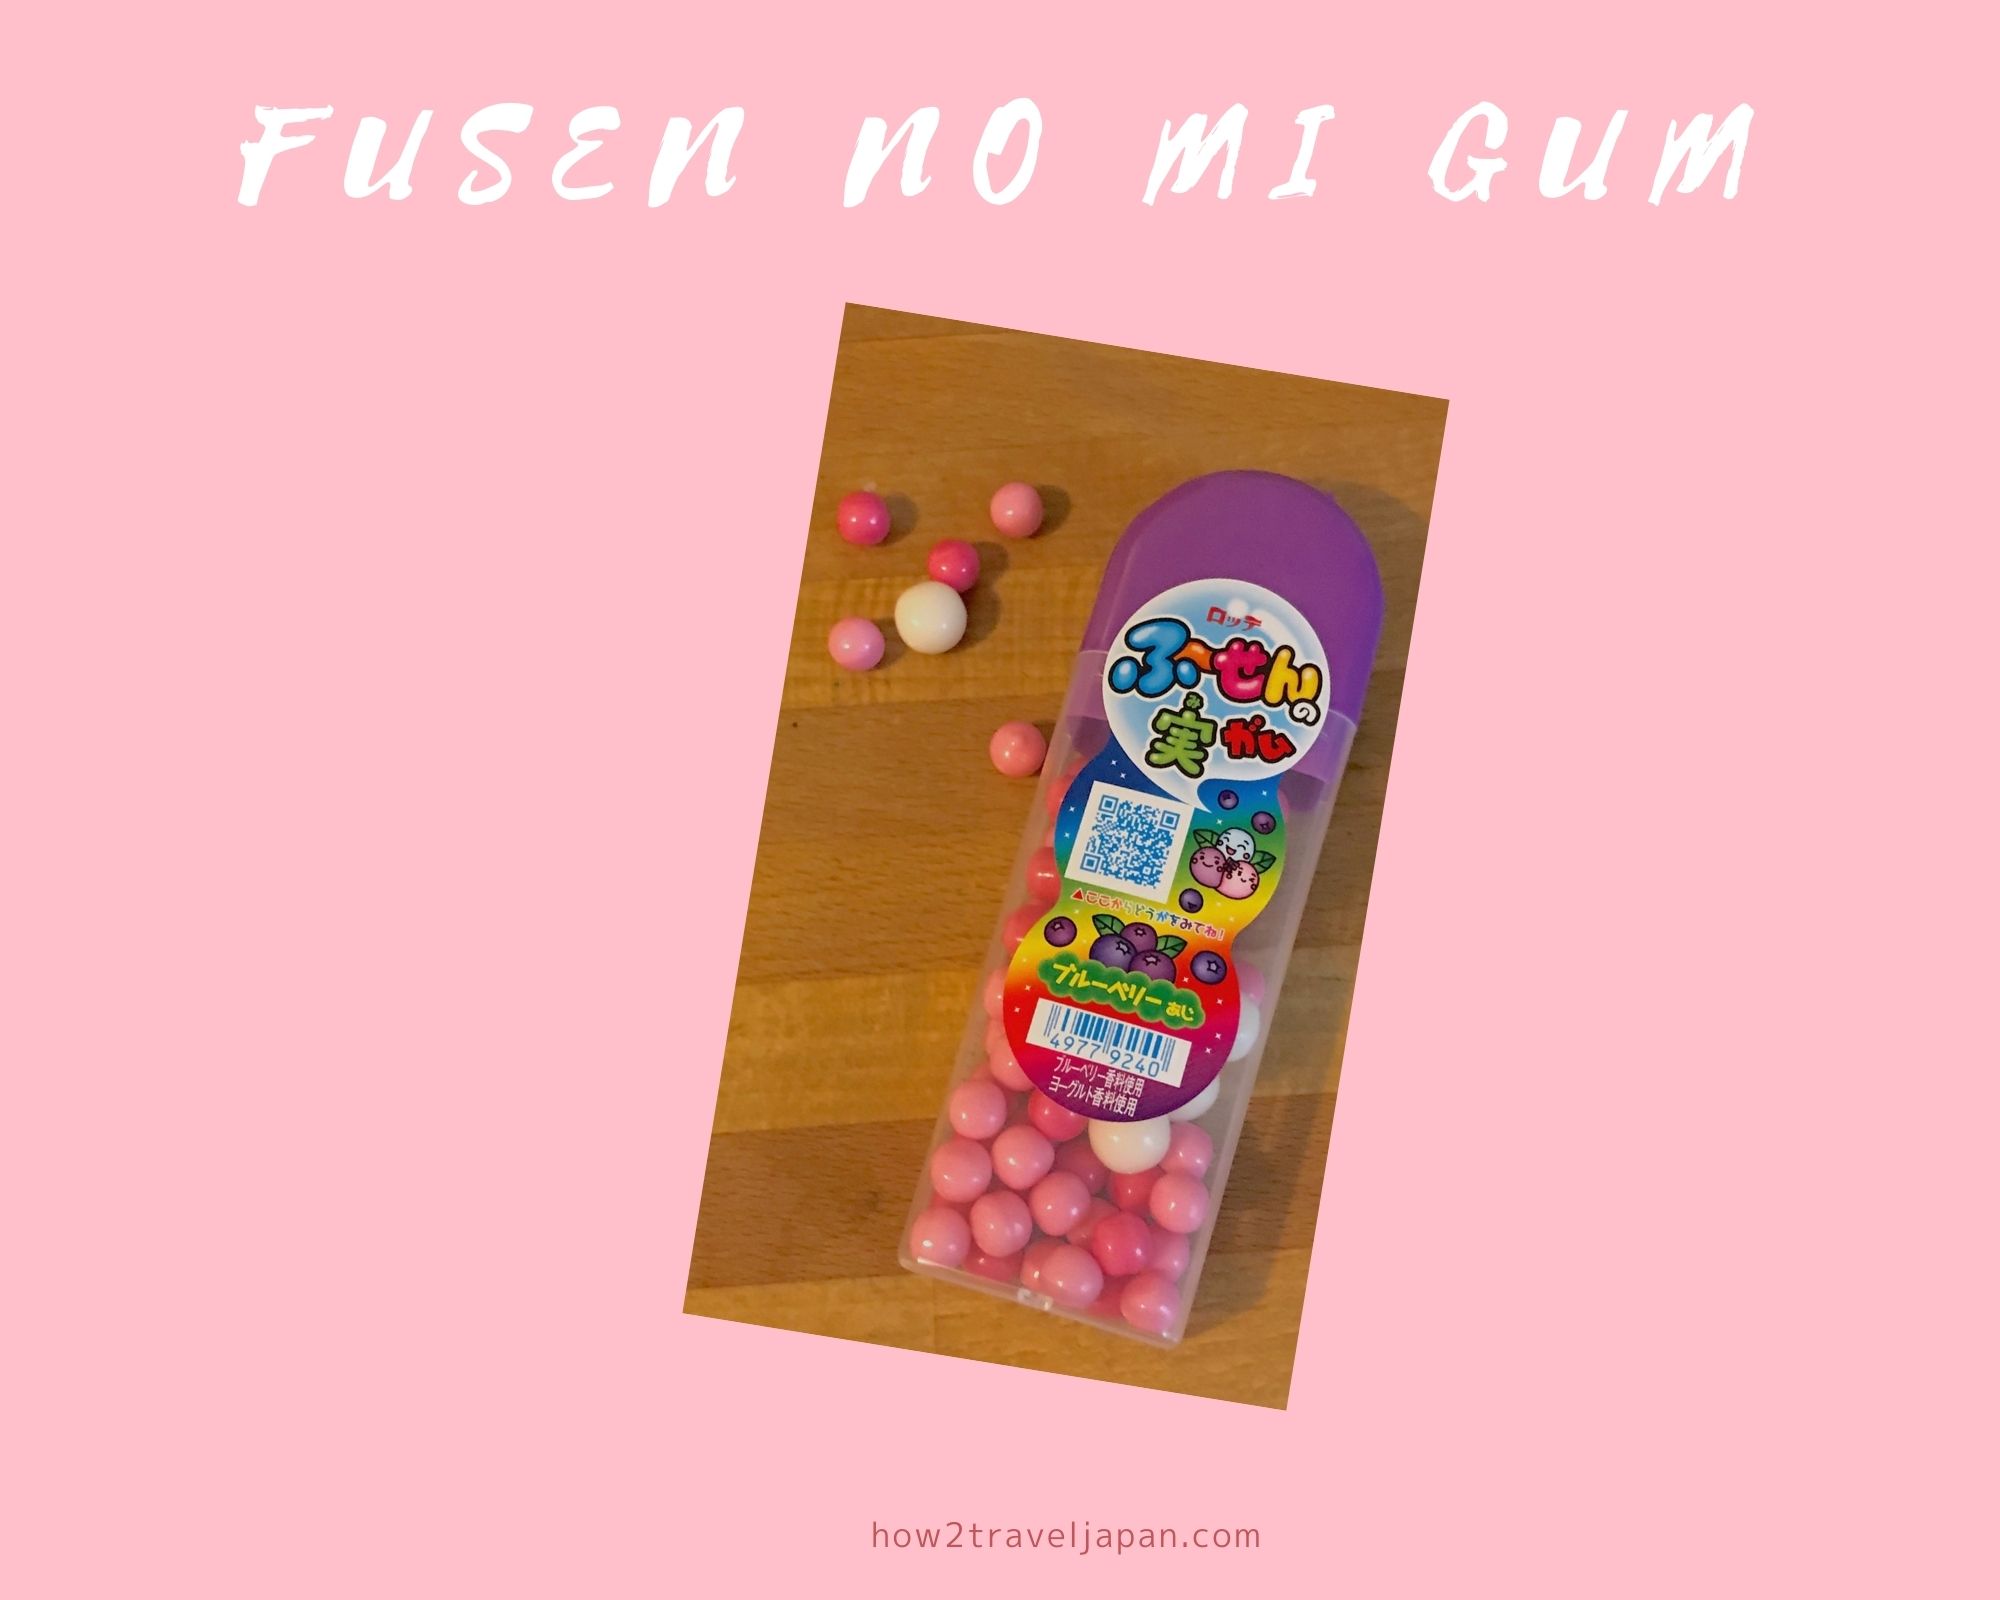 You are currently viewing Fusennomi gum from Lotte